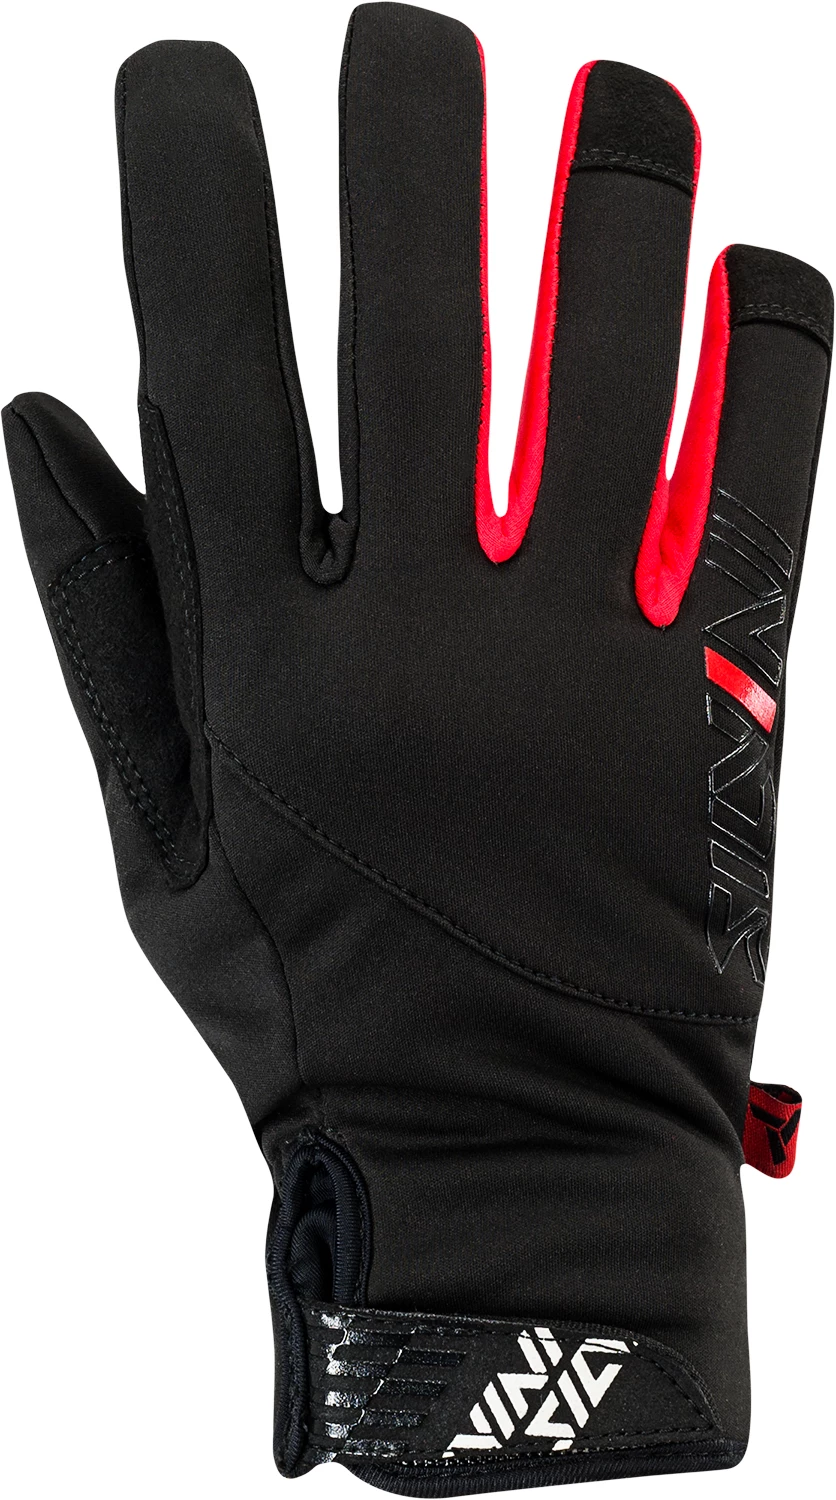 Women's cycling gloves Silvini Ortles